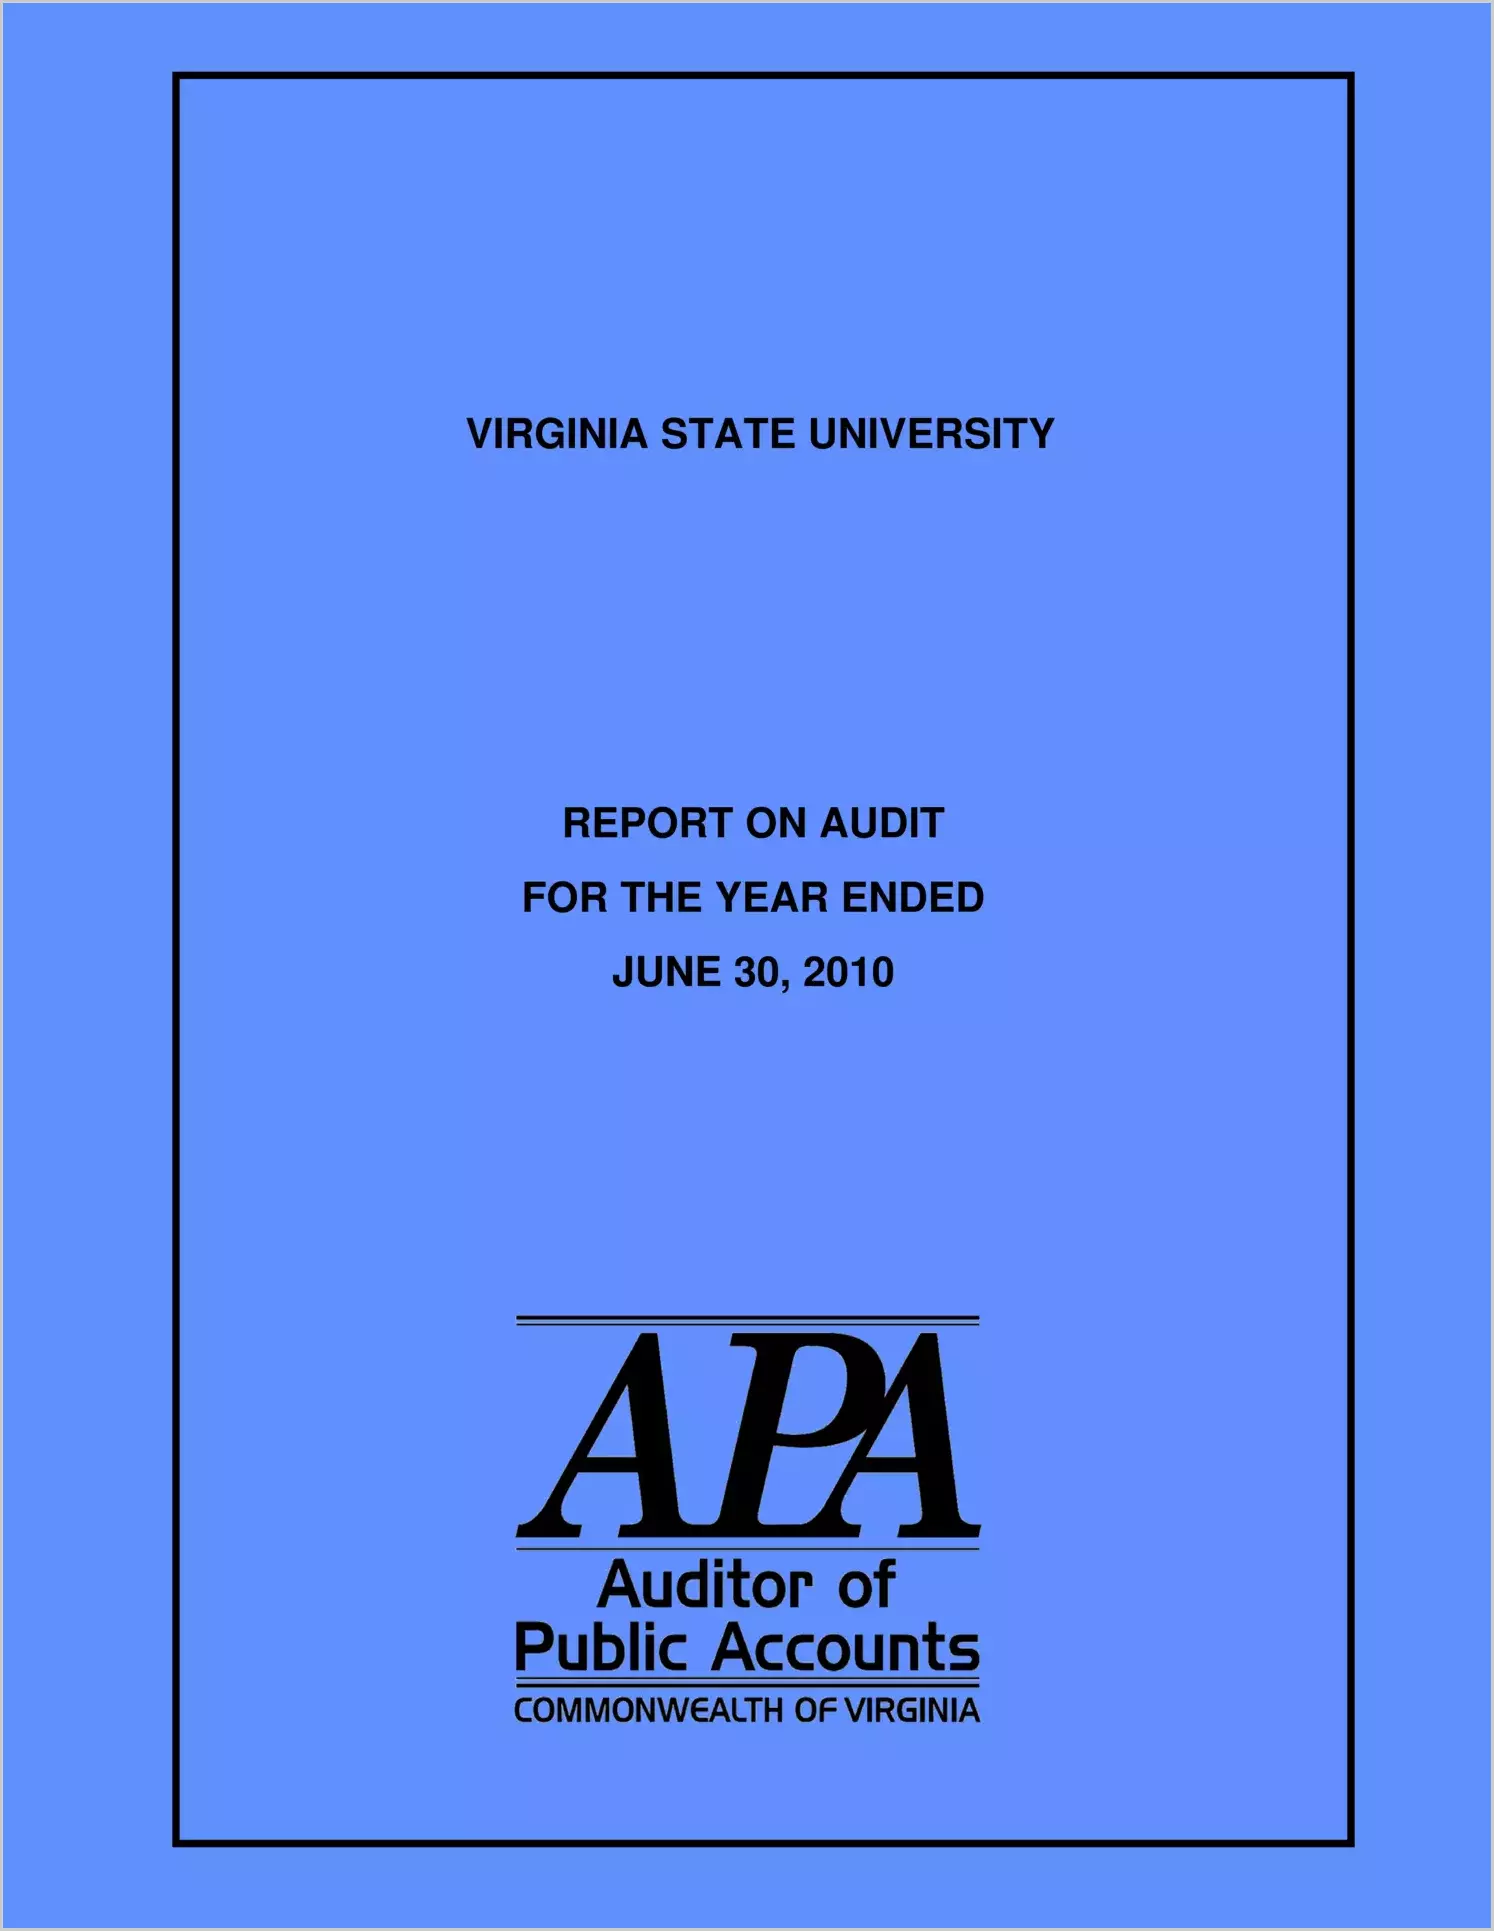 Virginia State University for the year ended June 30, 2010